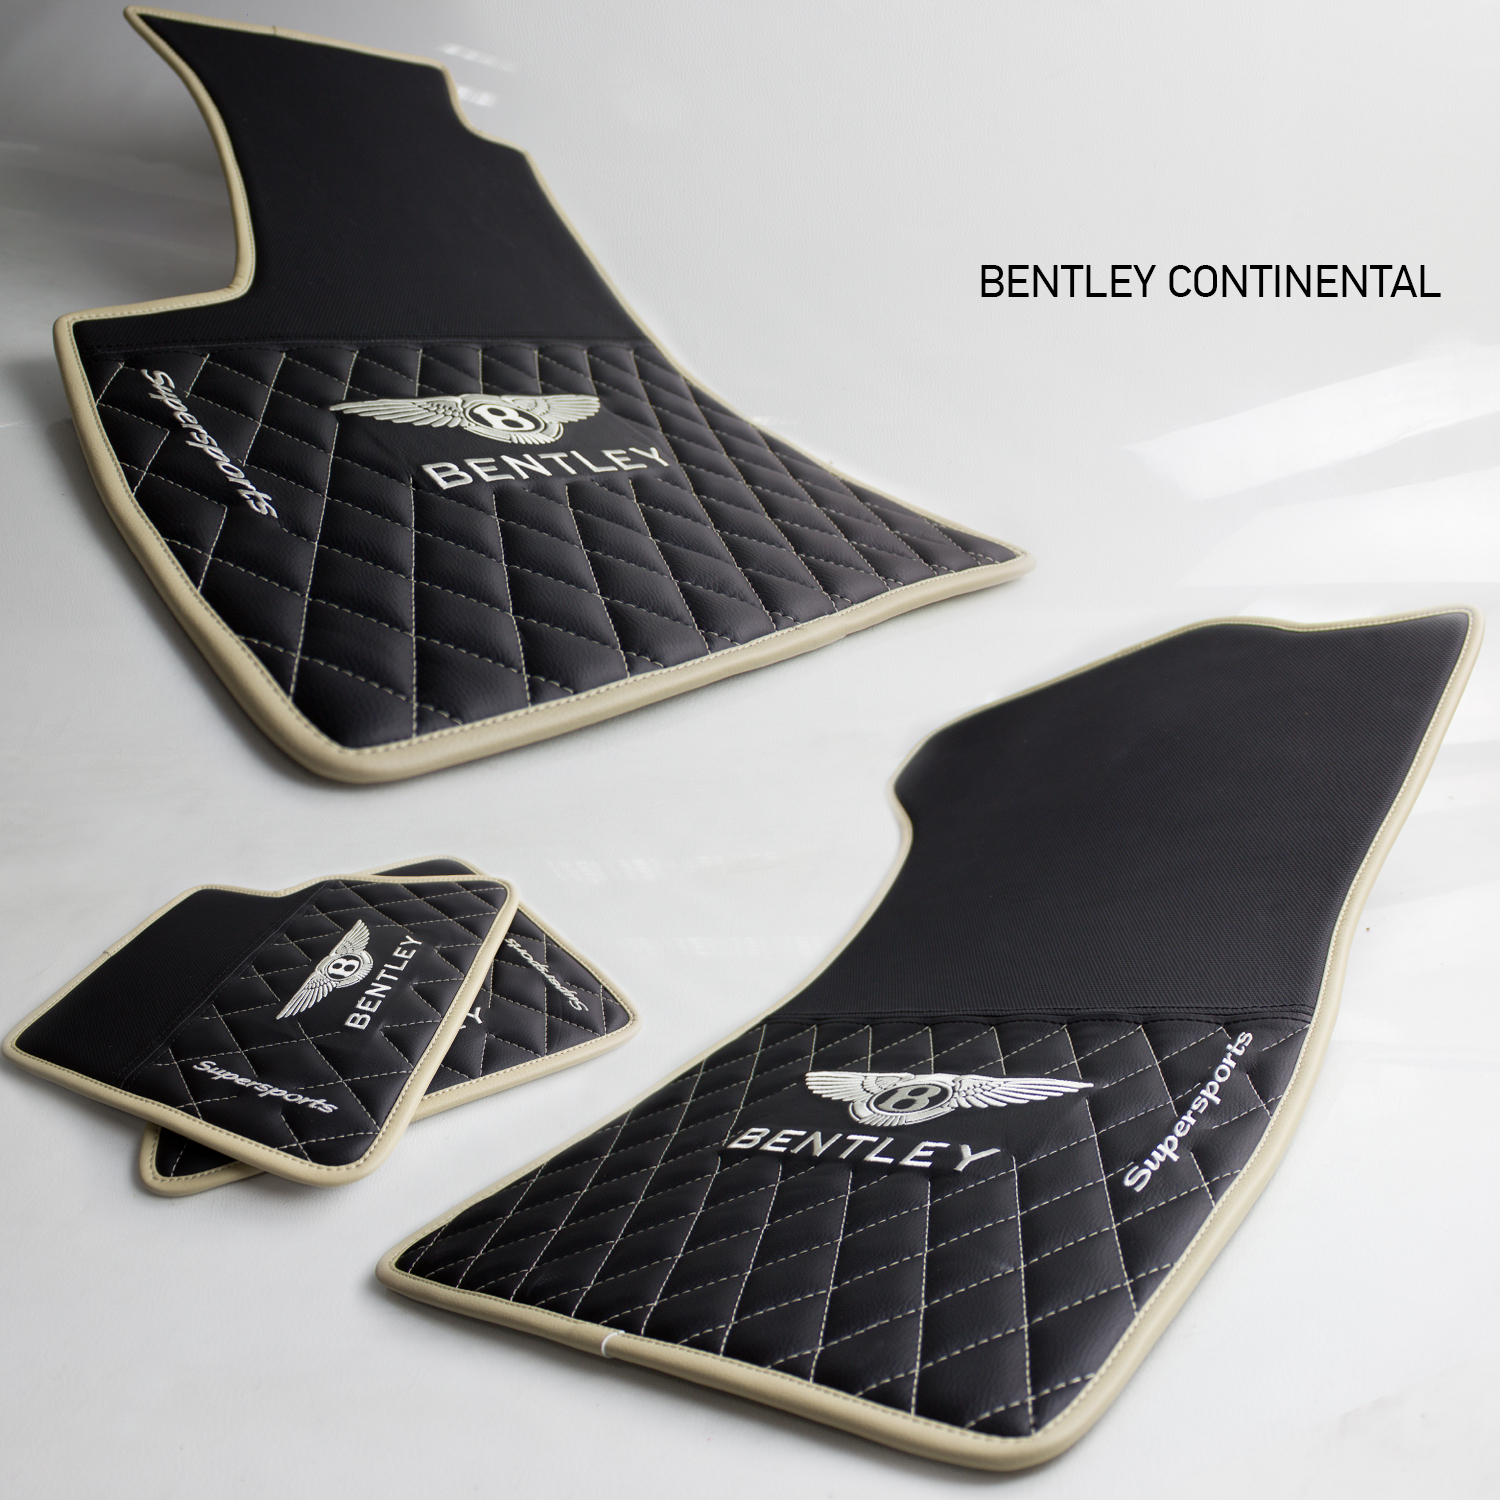 images-products-1-101-232988773-BENTLEY_CONTINENTAL.jpg